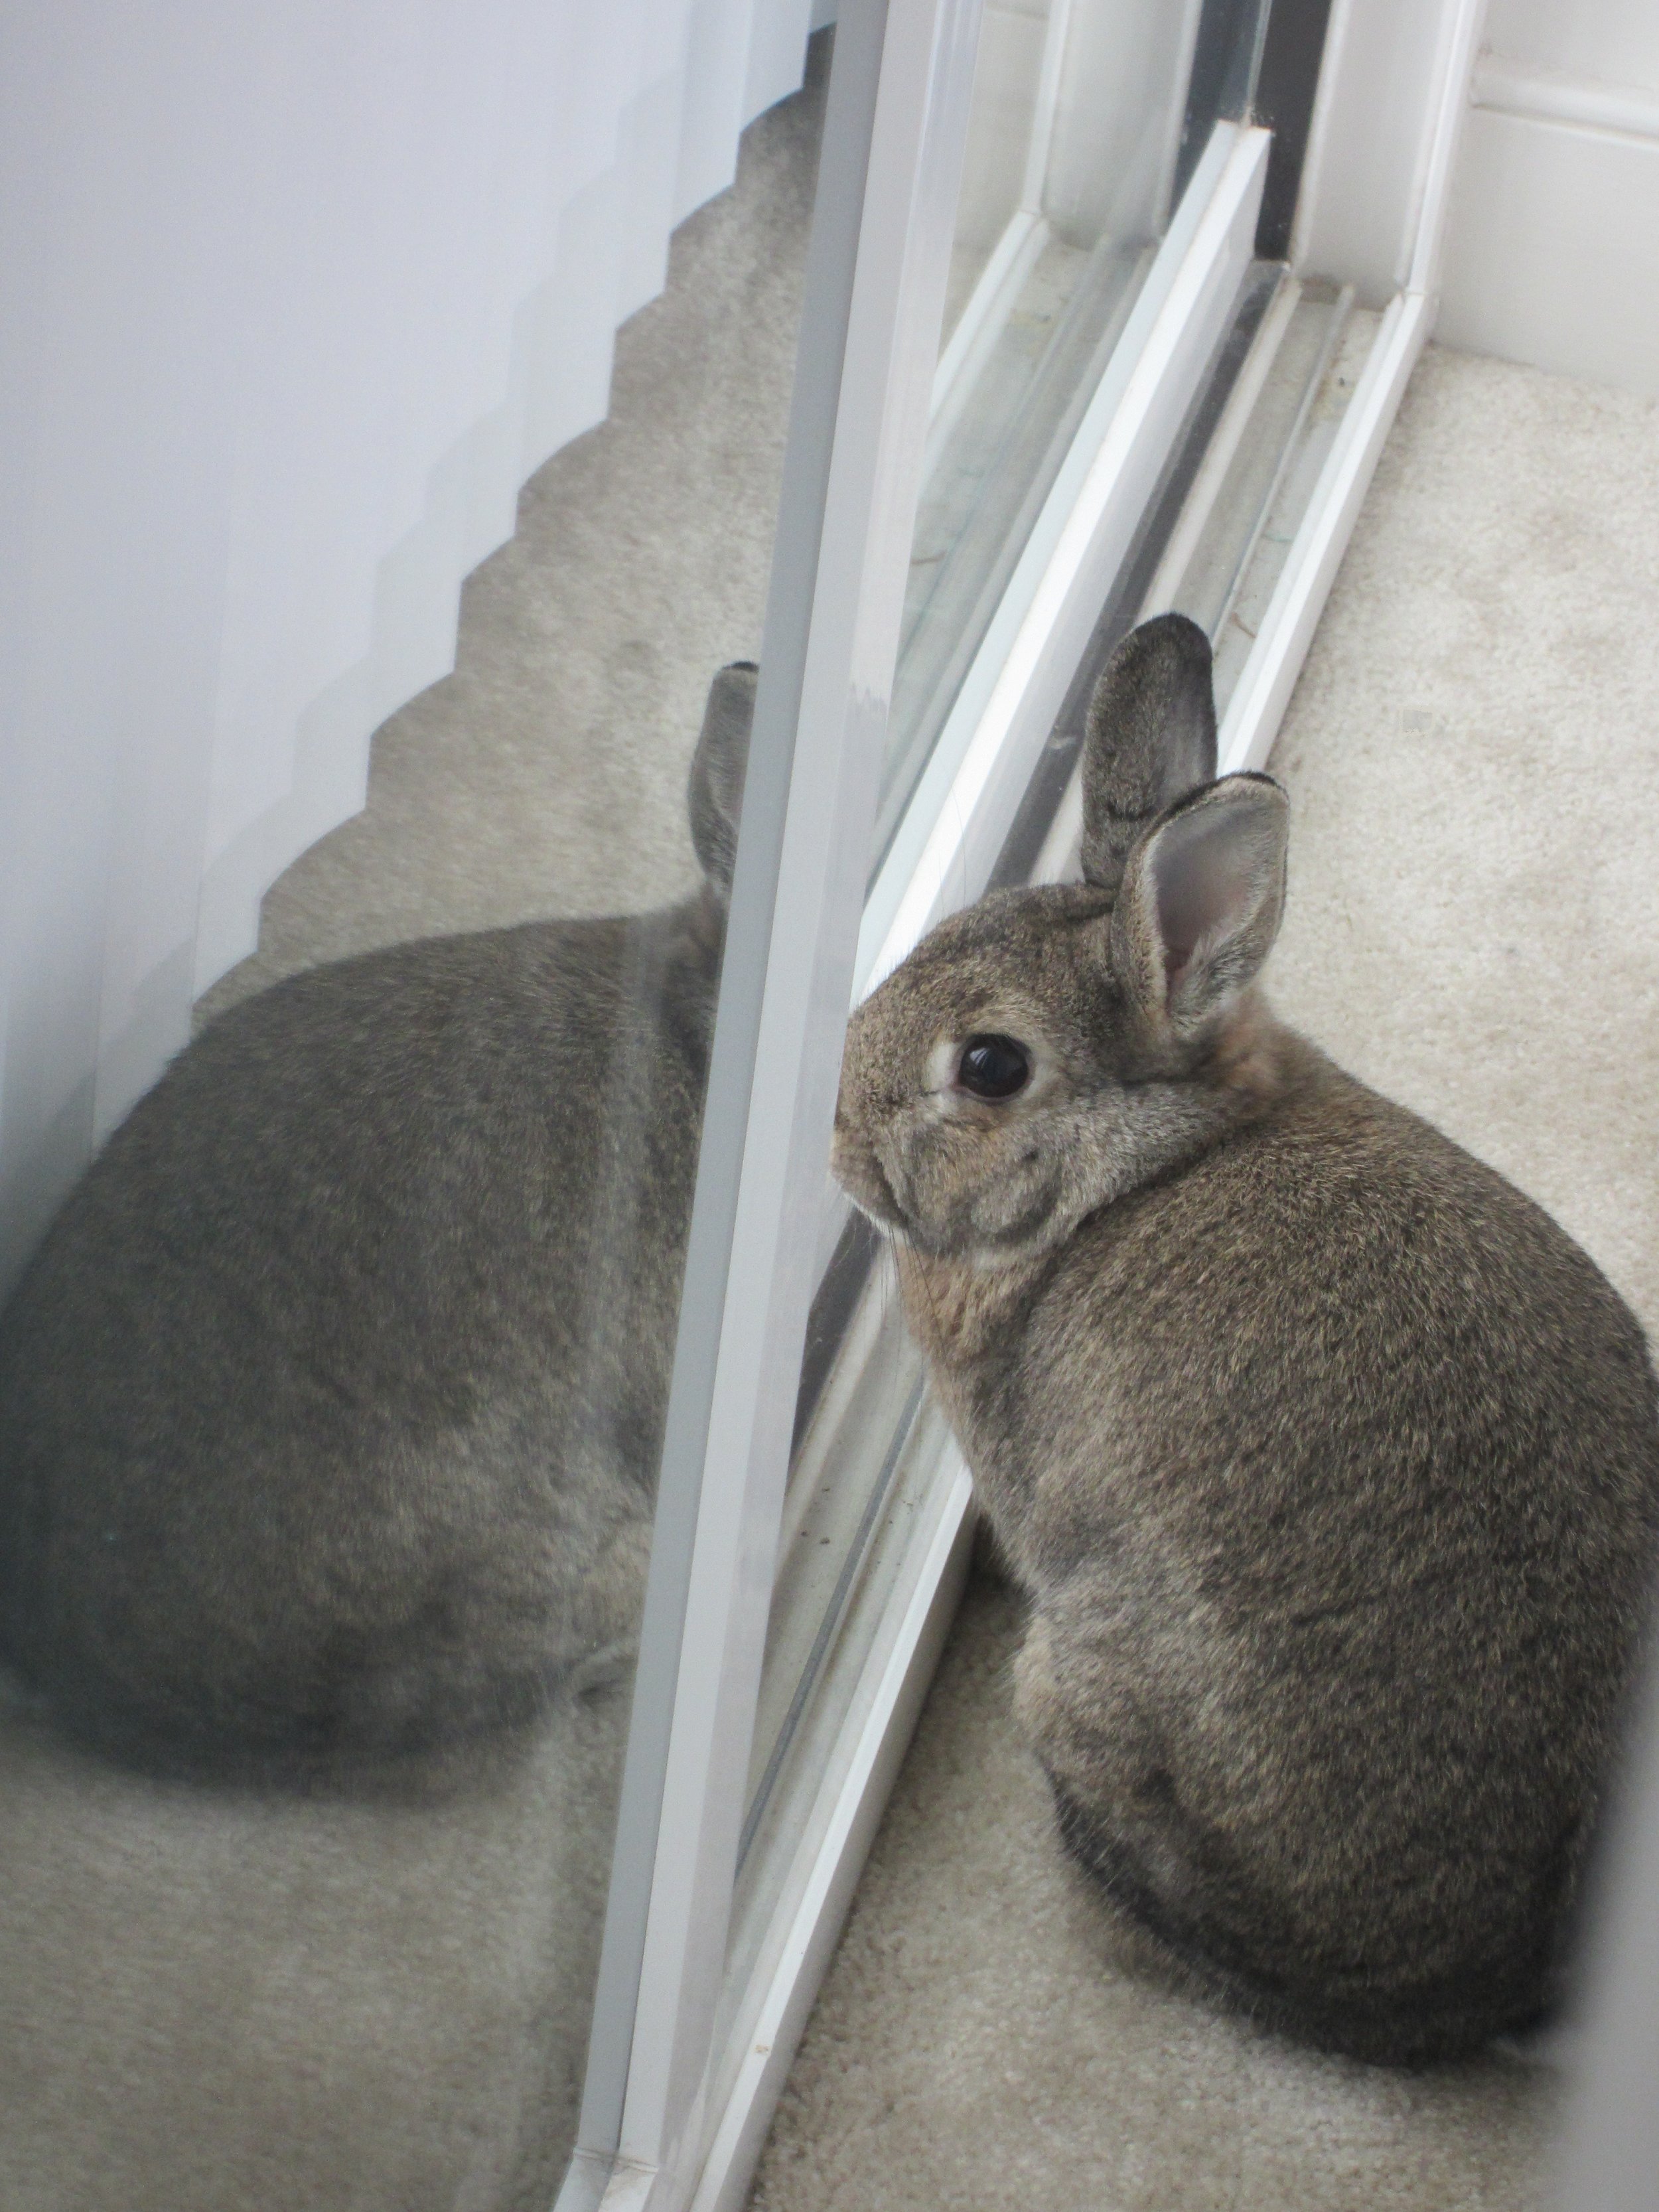 Bunny Loves Looking Out the Window 1